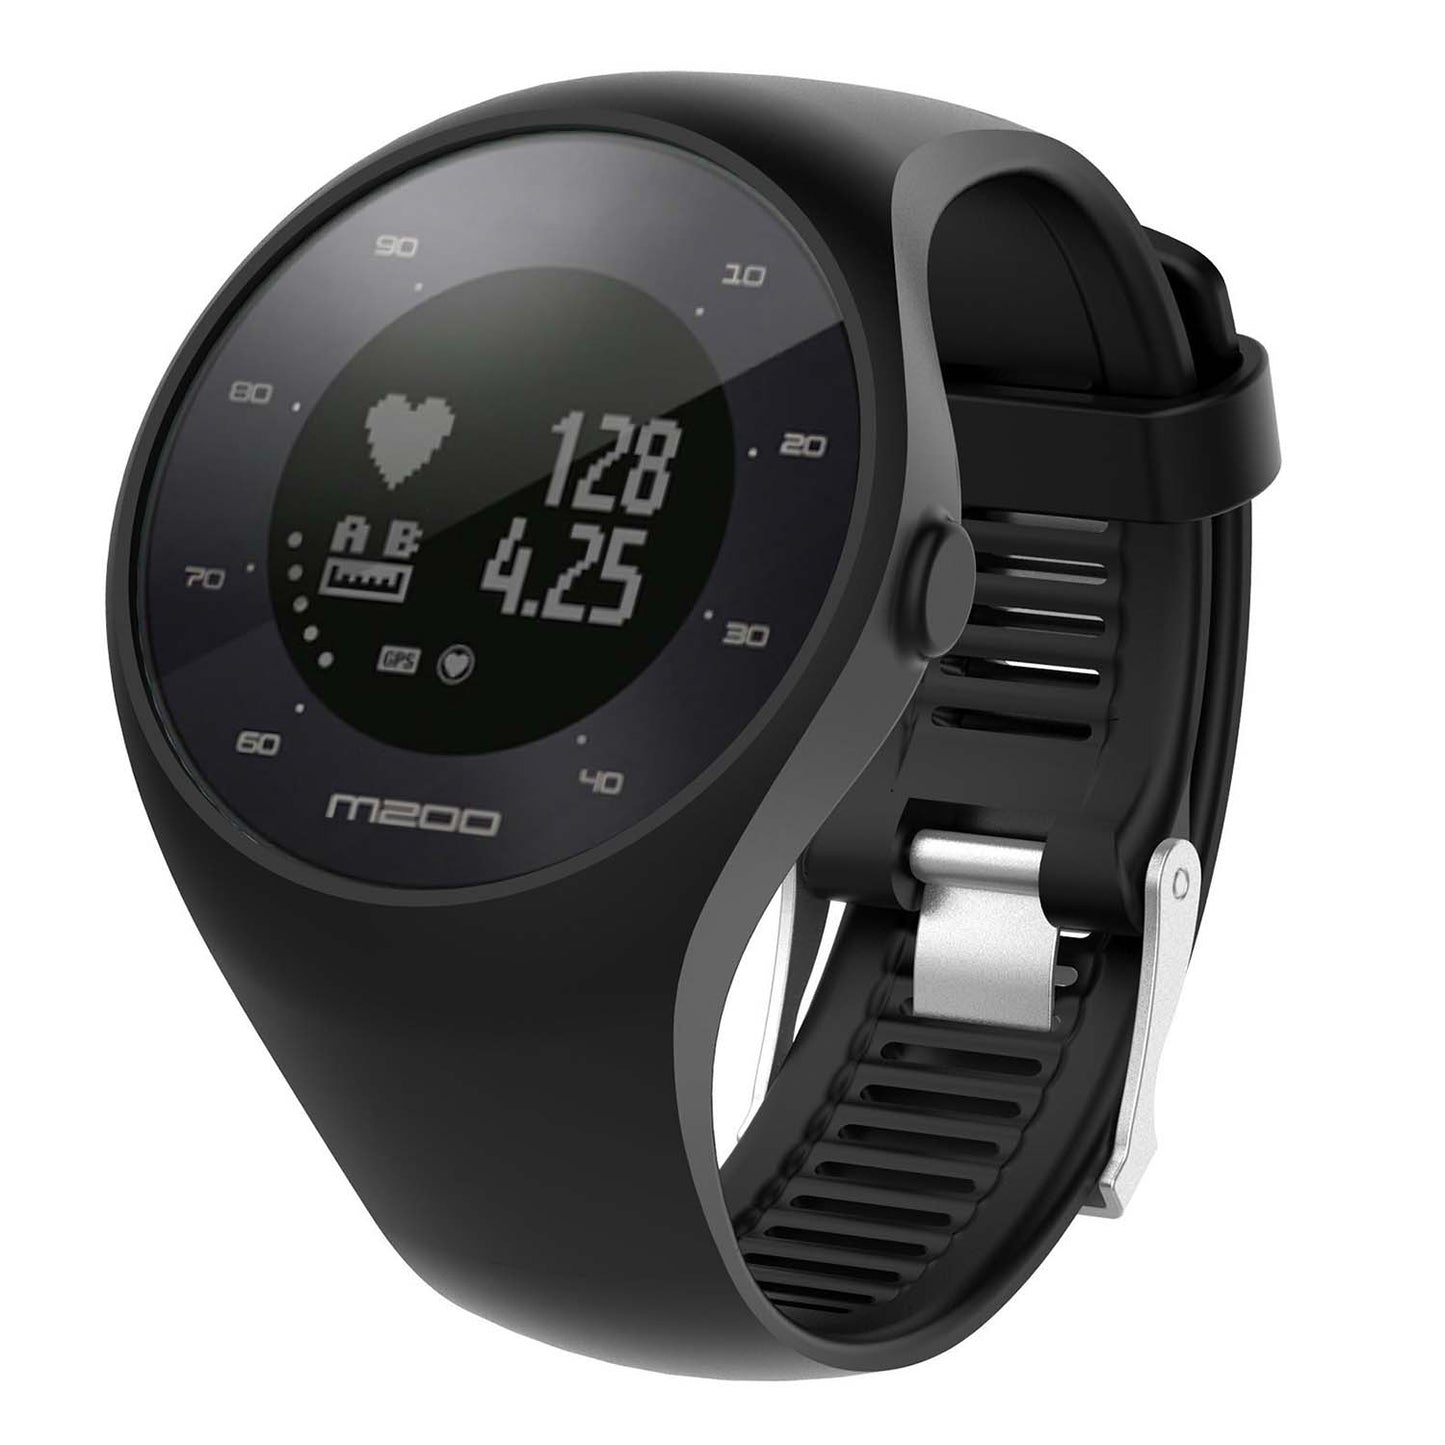 Replacement Band for Polar a300 Fitness Watch